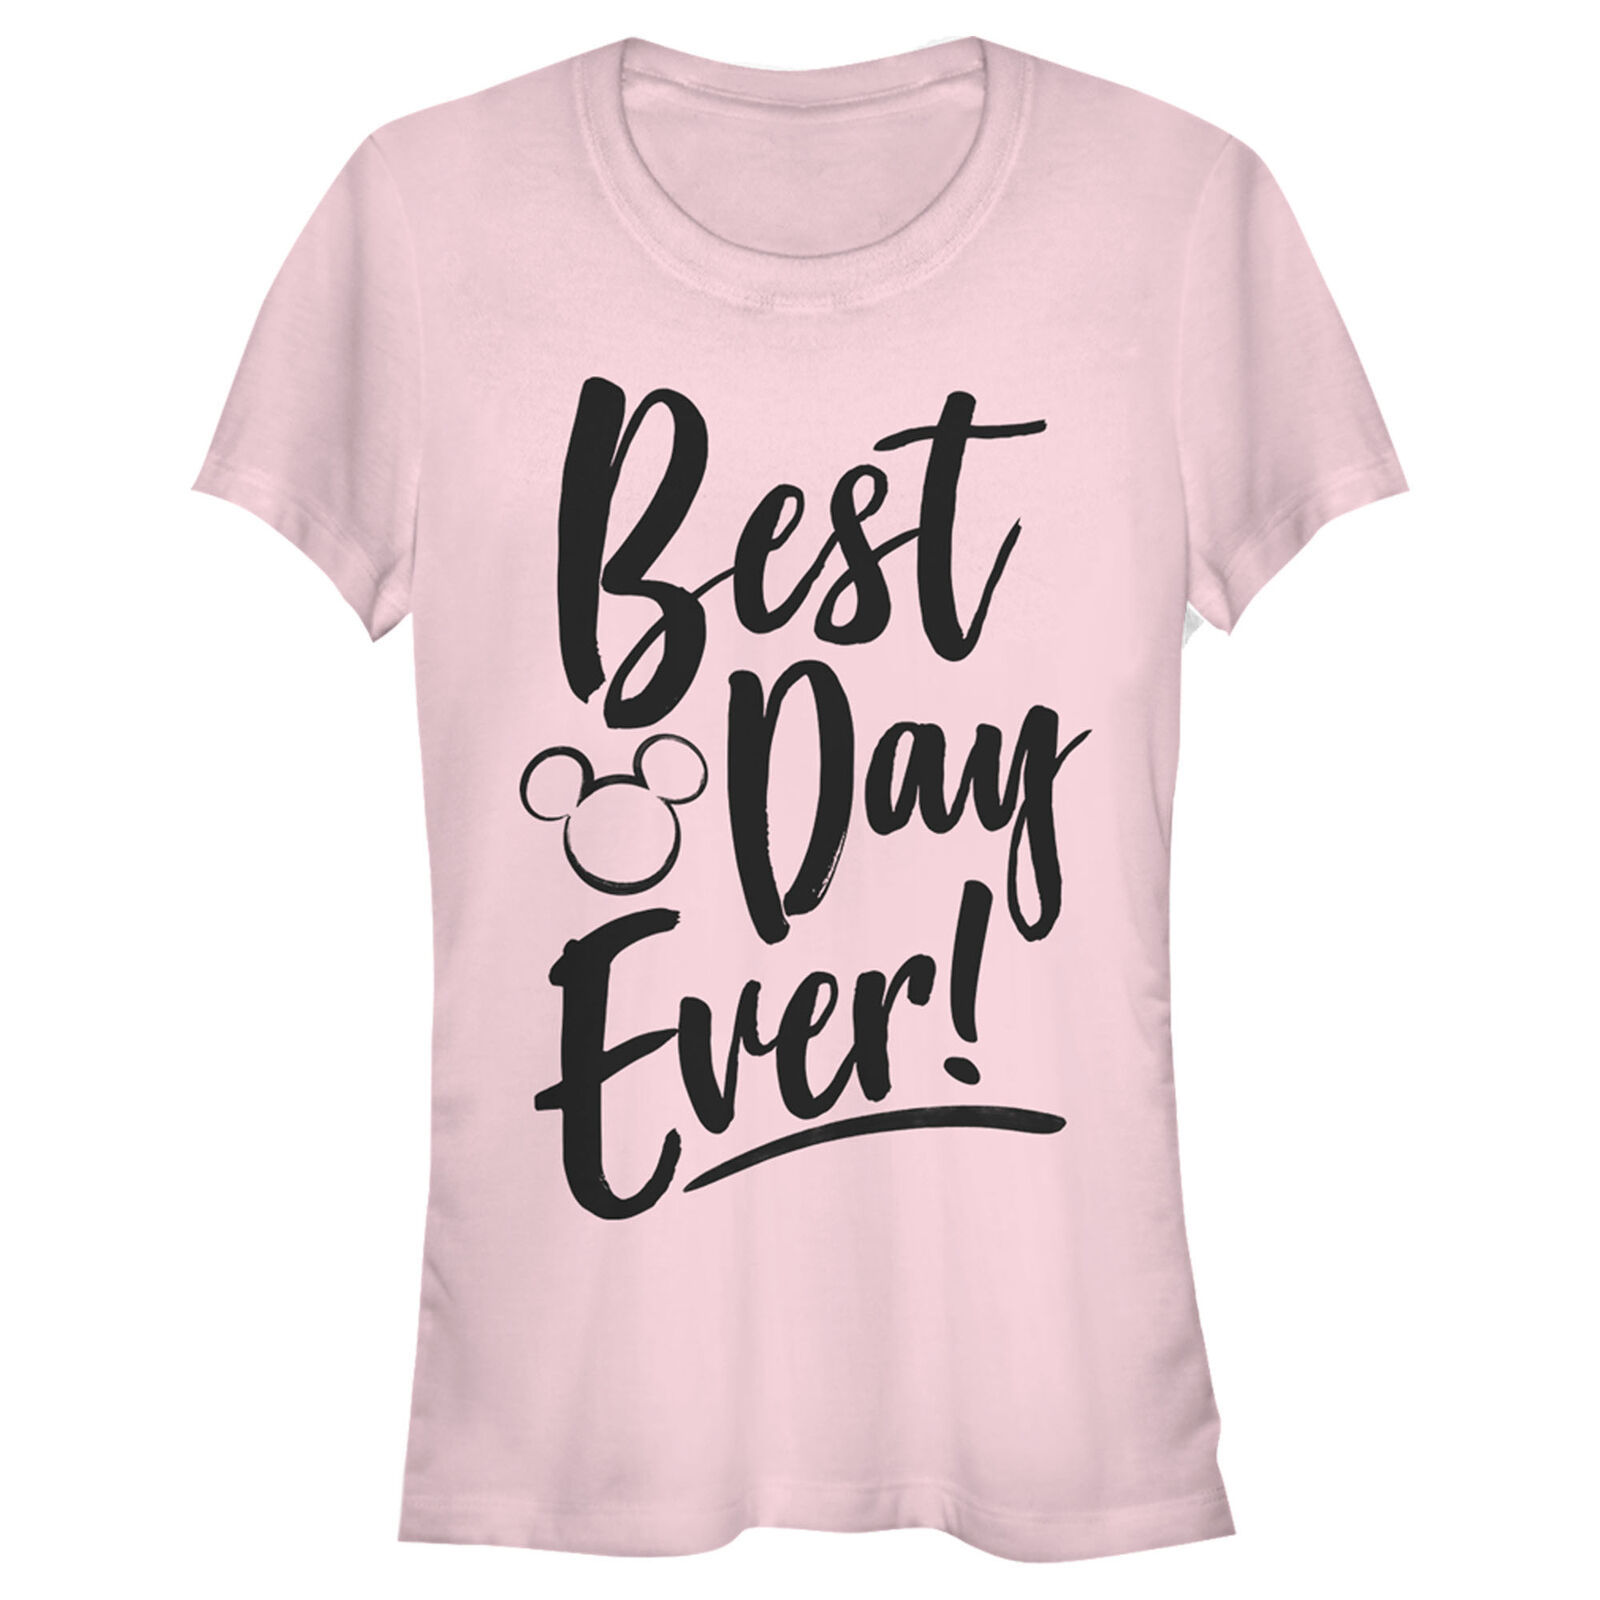 Primary image for Women's Best Day Ever Disney T-shirt Size: XXL New without Tags